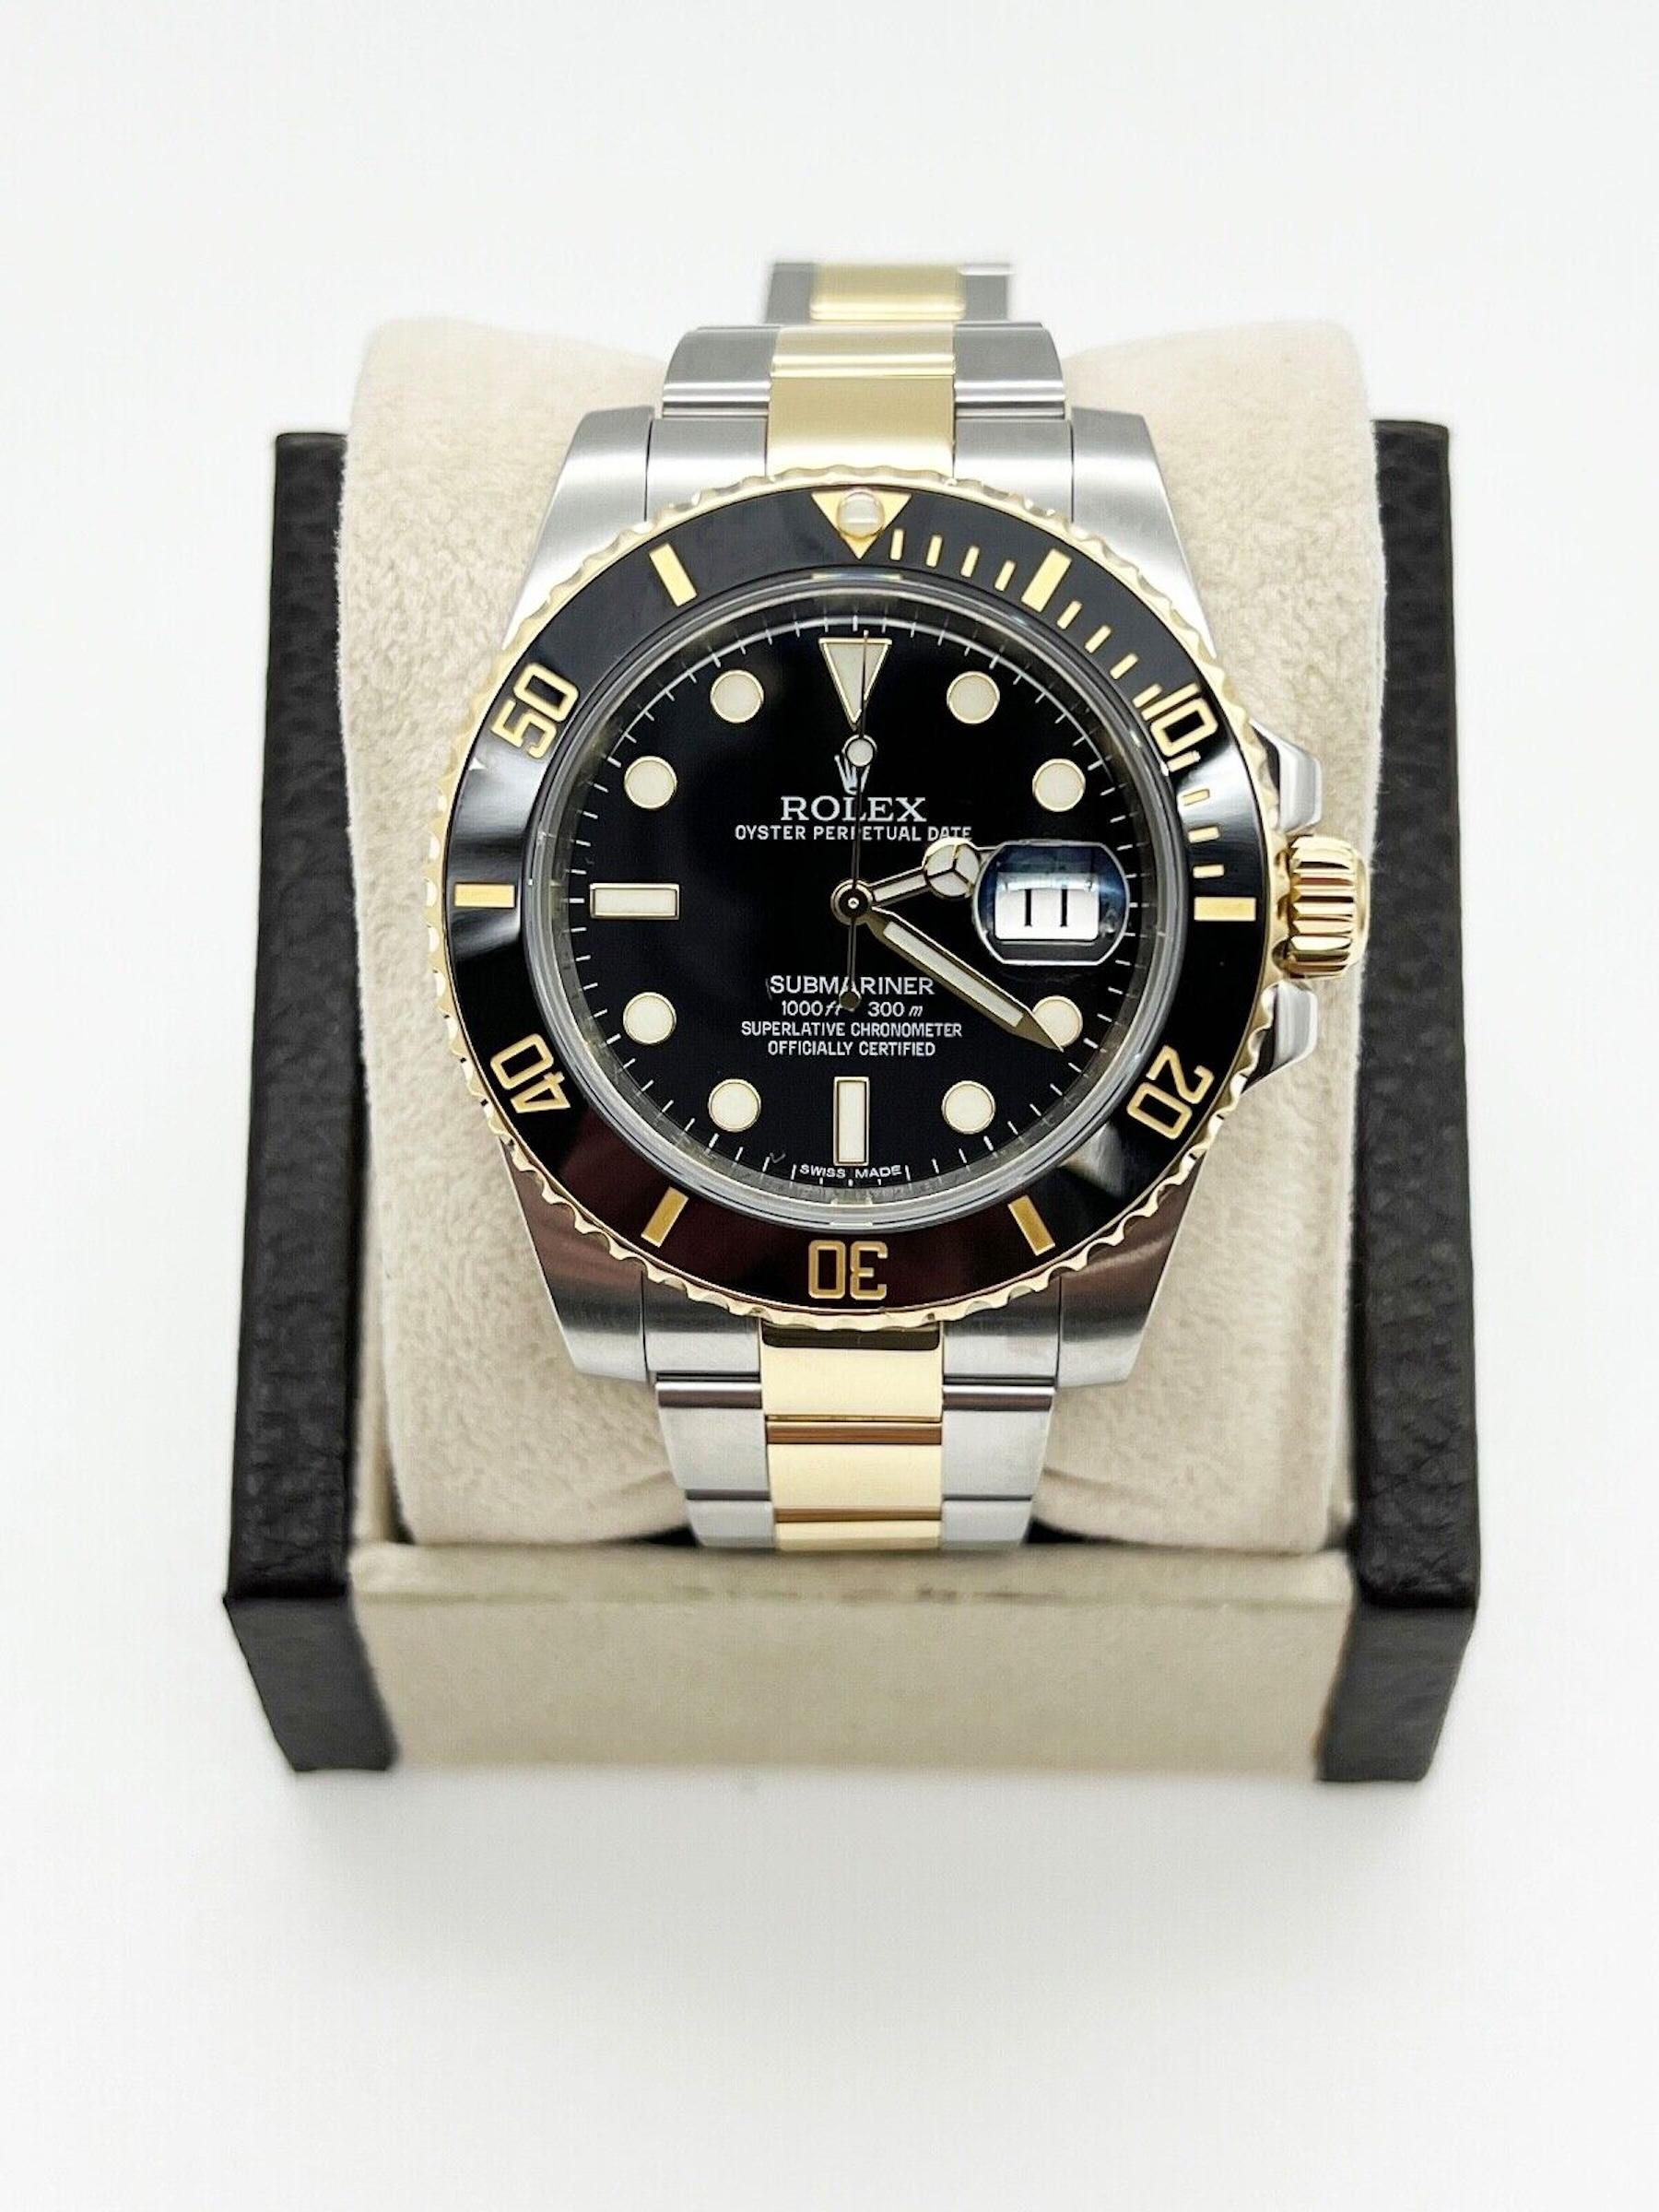 Style Number: 116613

Serial: 797R7***

Model: Submariner 

Case Material: Stainless Steel 

Band: 18K Yellow Gold & Stainless Steel 

Bezel: Black Ceramic Bezel 

Dial: Black 

Face: Sapphire Crystal 

Case Size: 40mm 

Includes: 

-Rolex Box &